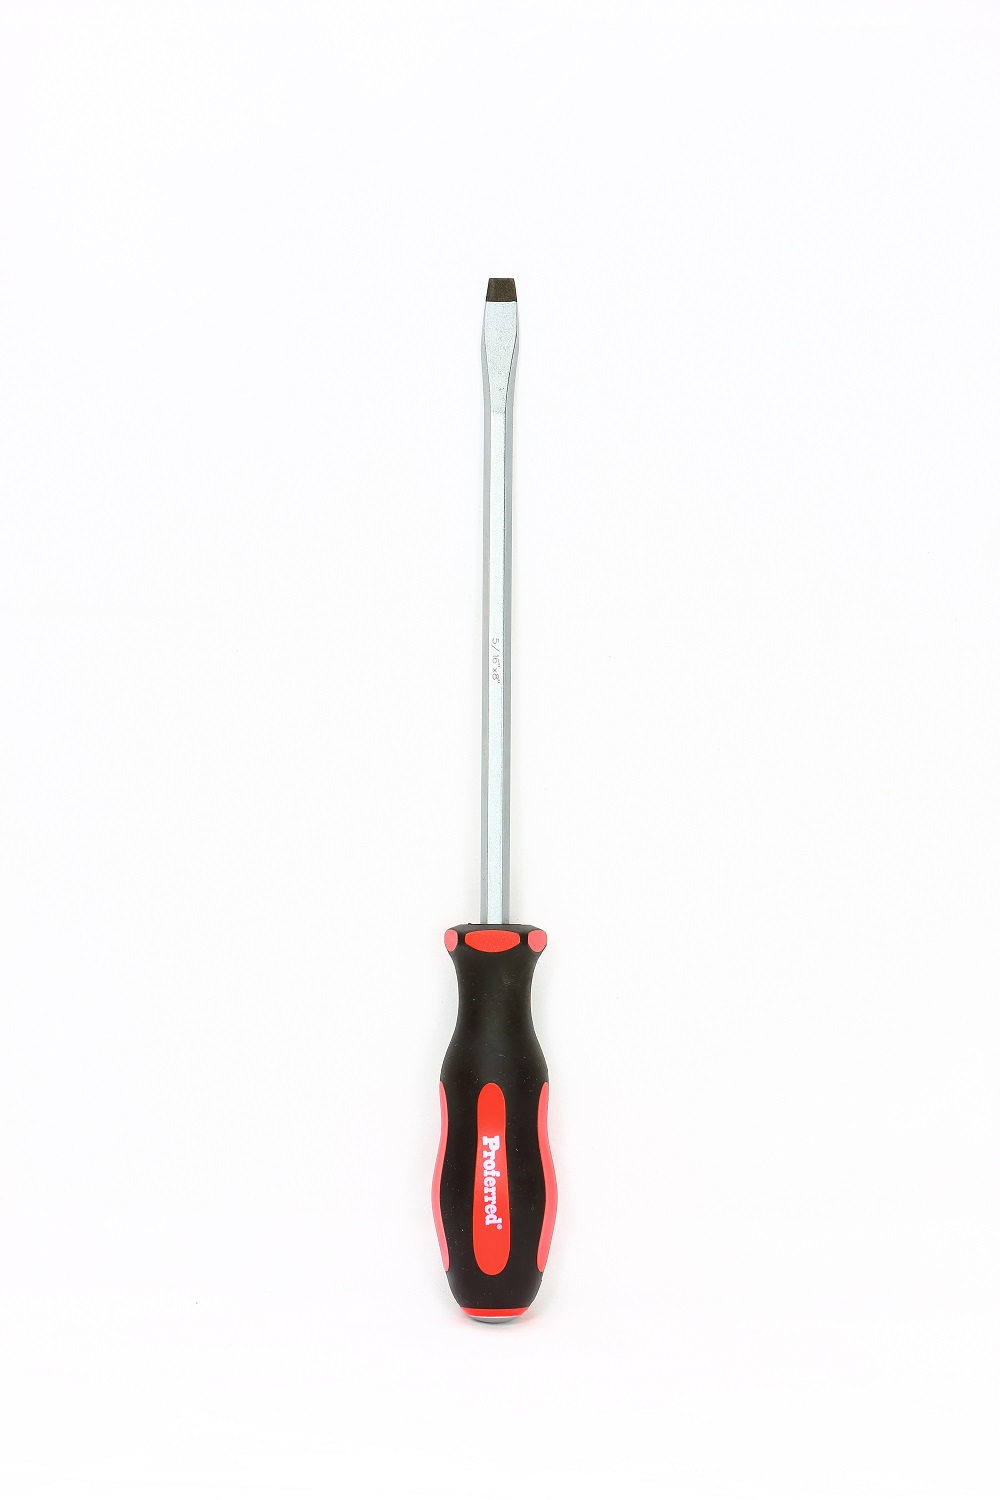 PROFERRED GO-THRU SCREWDRIVER SLOTTED 5/16''X8'' RED HANDLE 